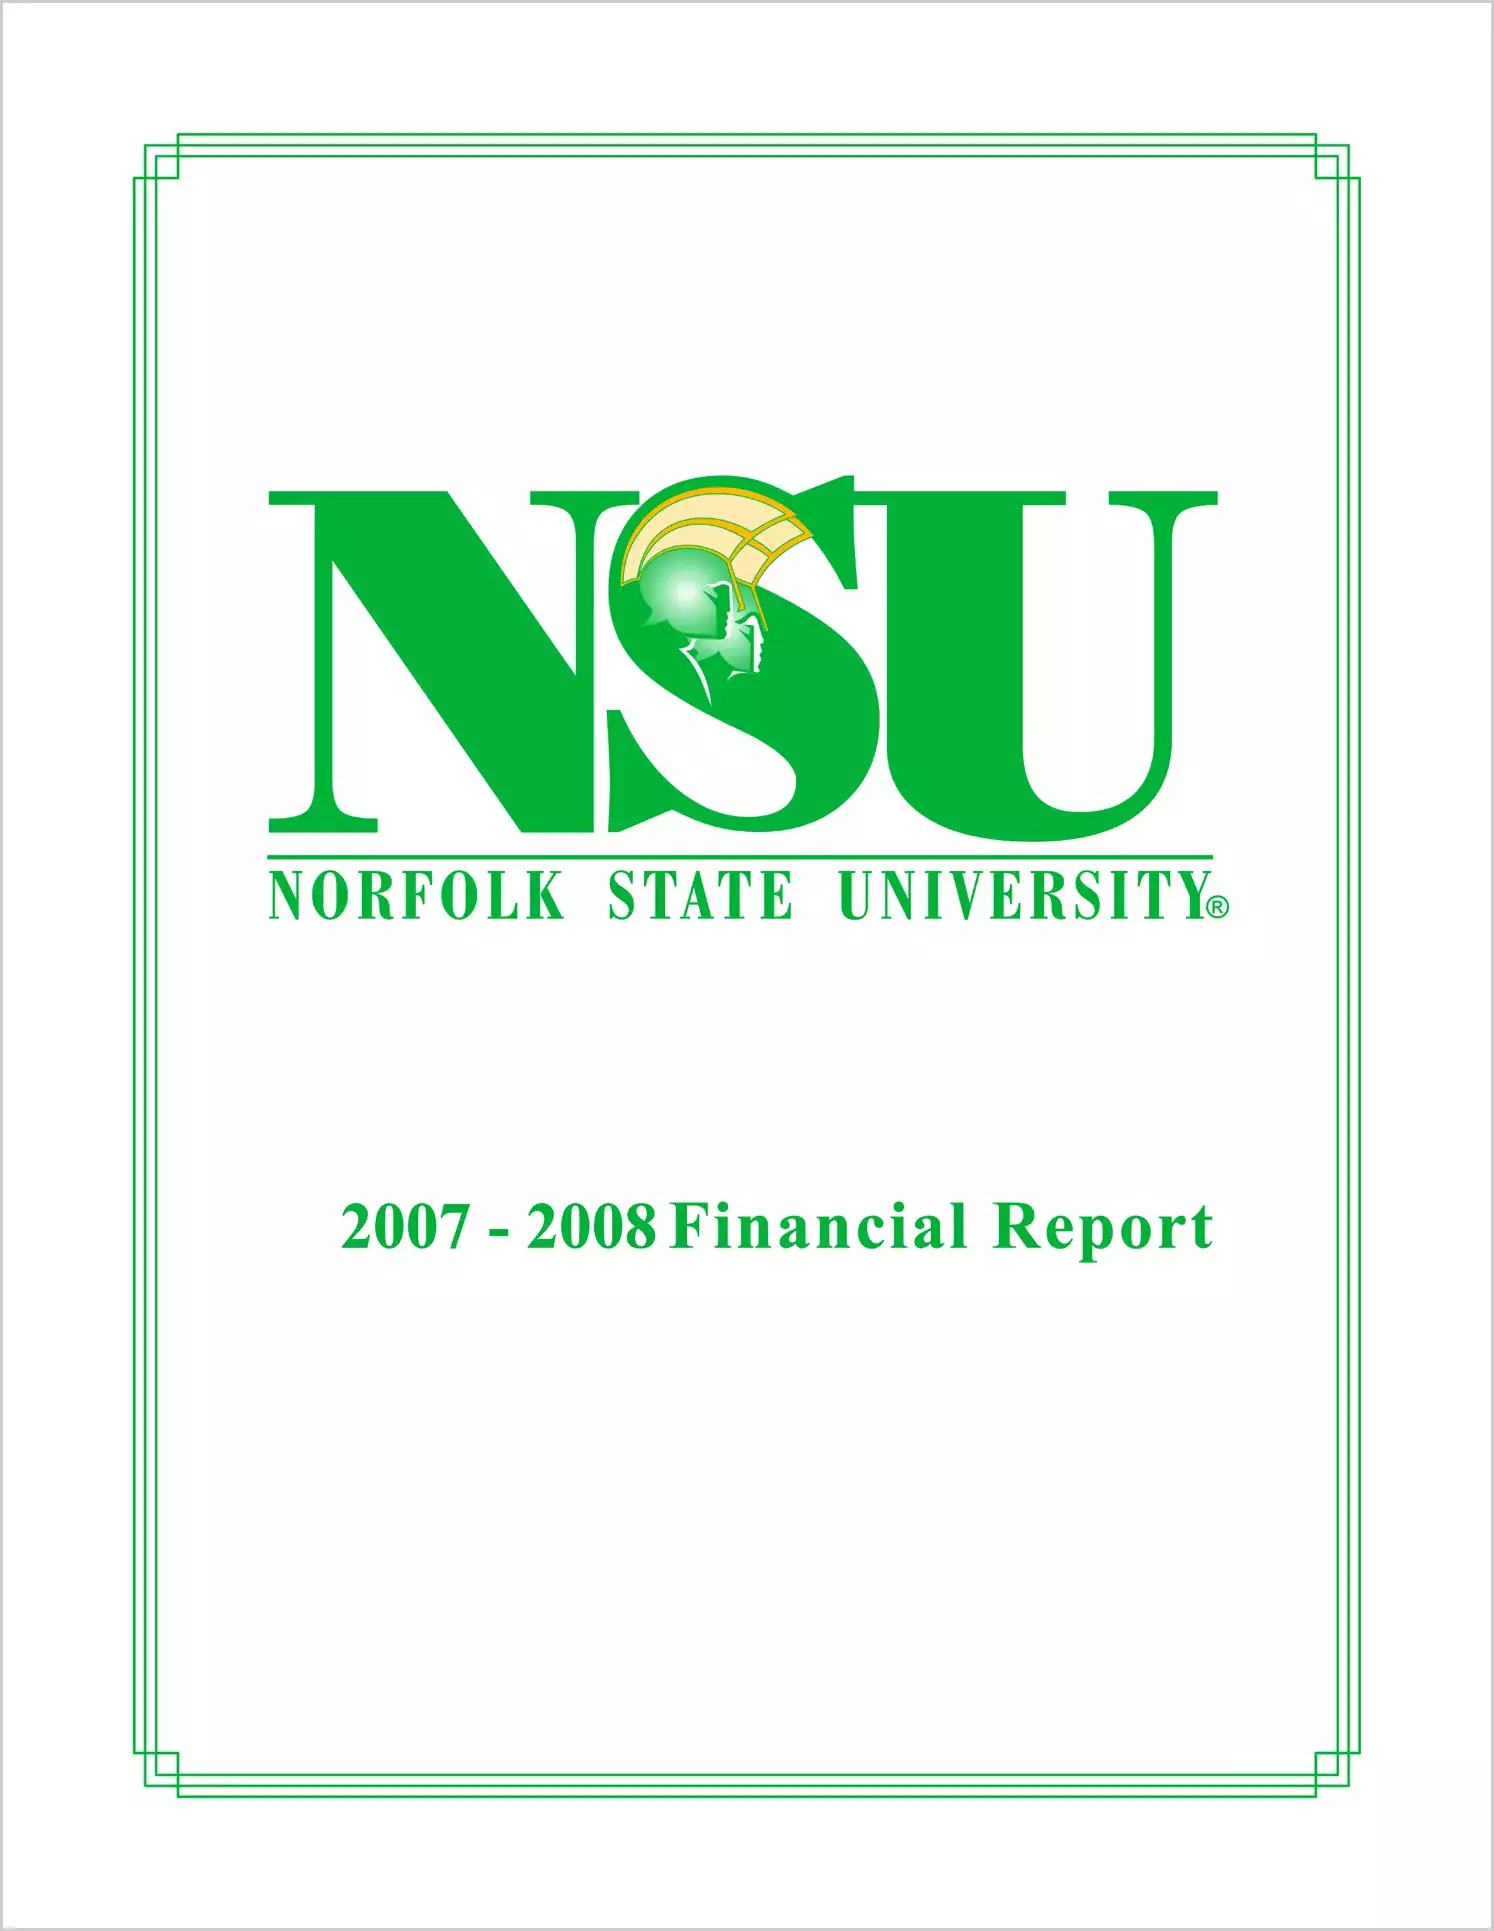 Norfolk State University Financial Statements for the year ended June 30, 2008